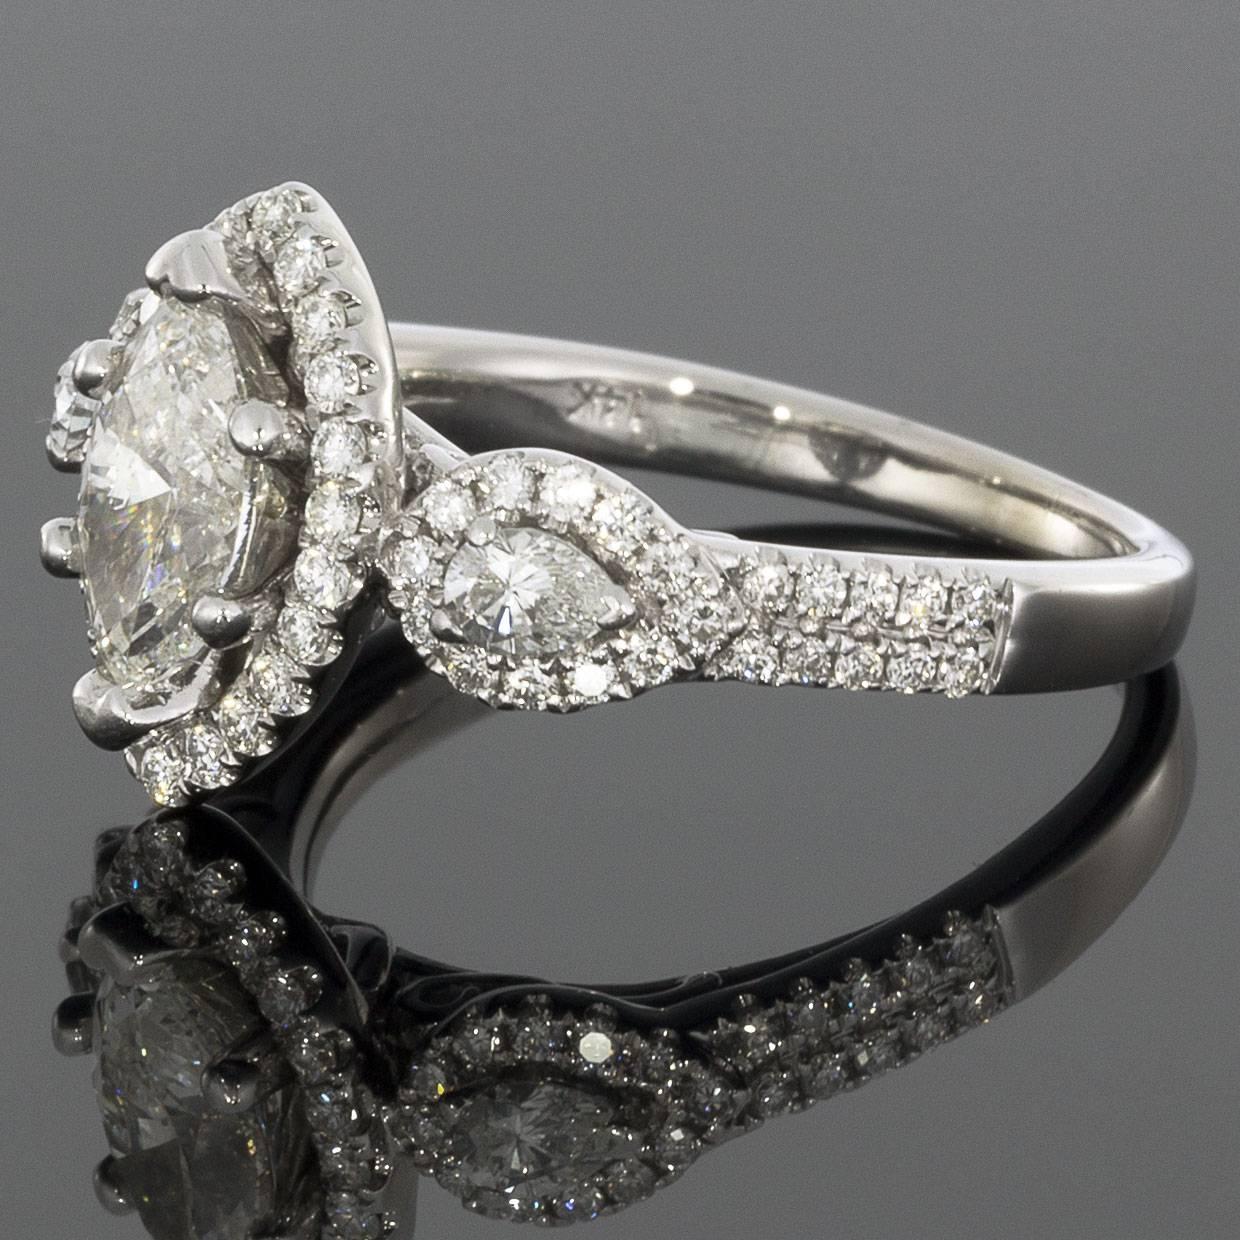 Marquise brilliant cut diamonds are a great option if you are looking for something unique that maximizes carat weight & elongates the finger. The center diamond in this beautiful engagement ring is a .82 carat marquise shape. The center diamond